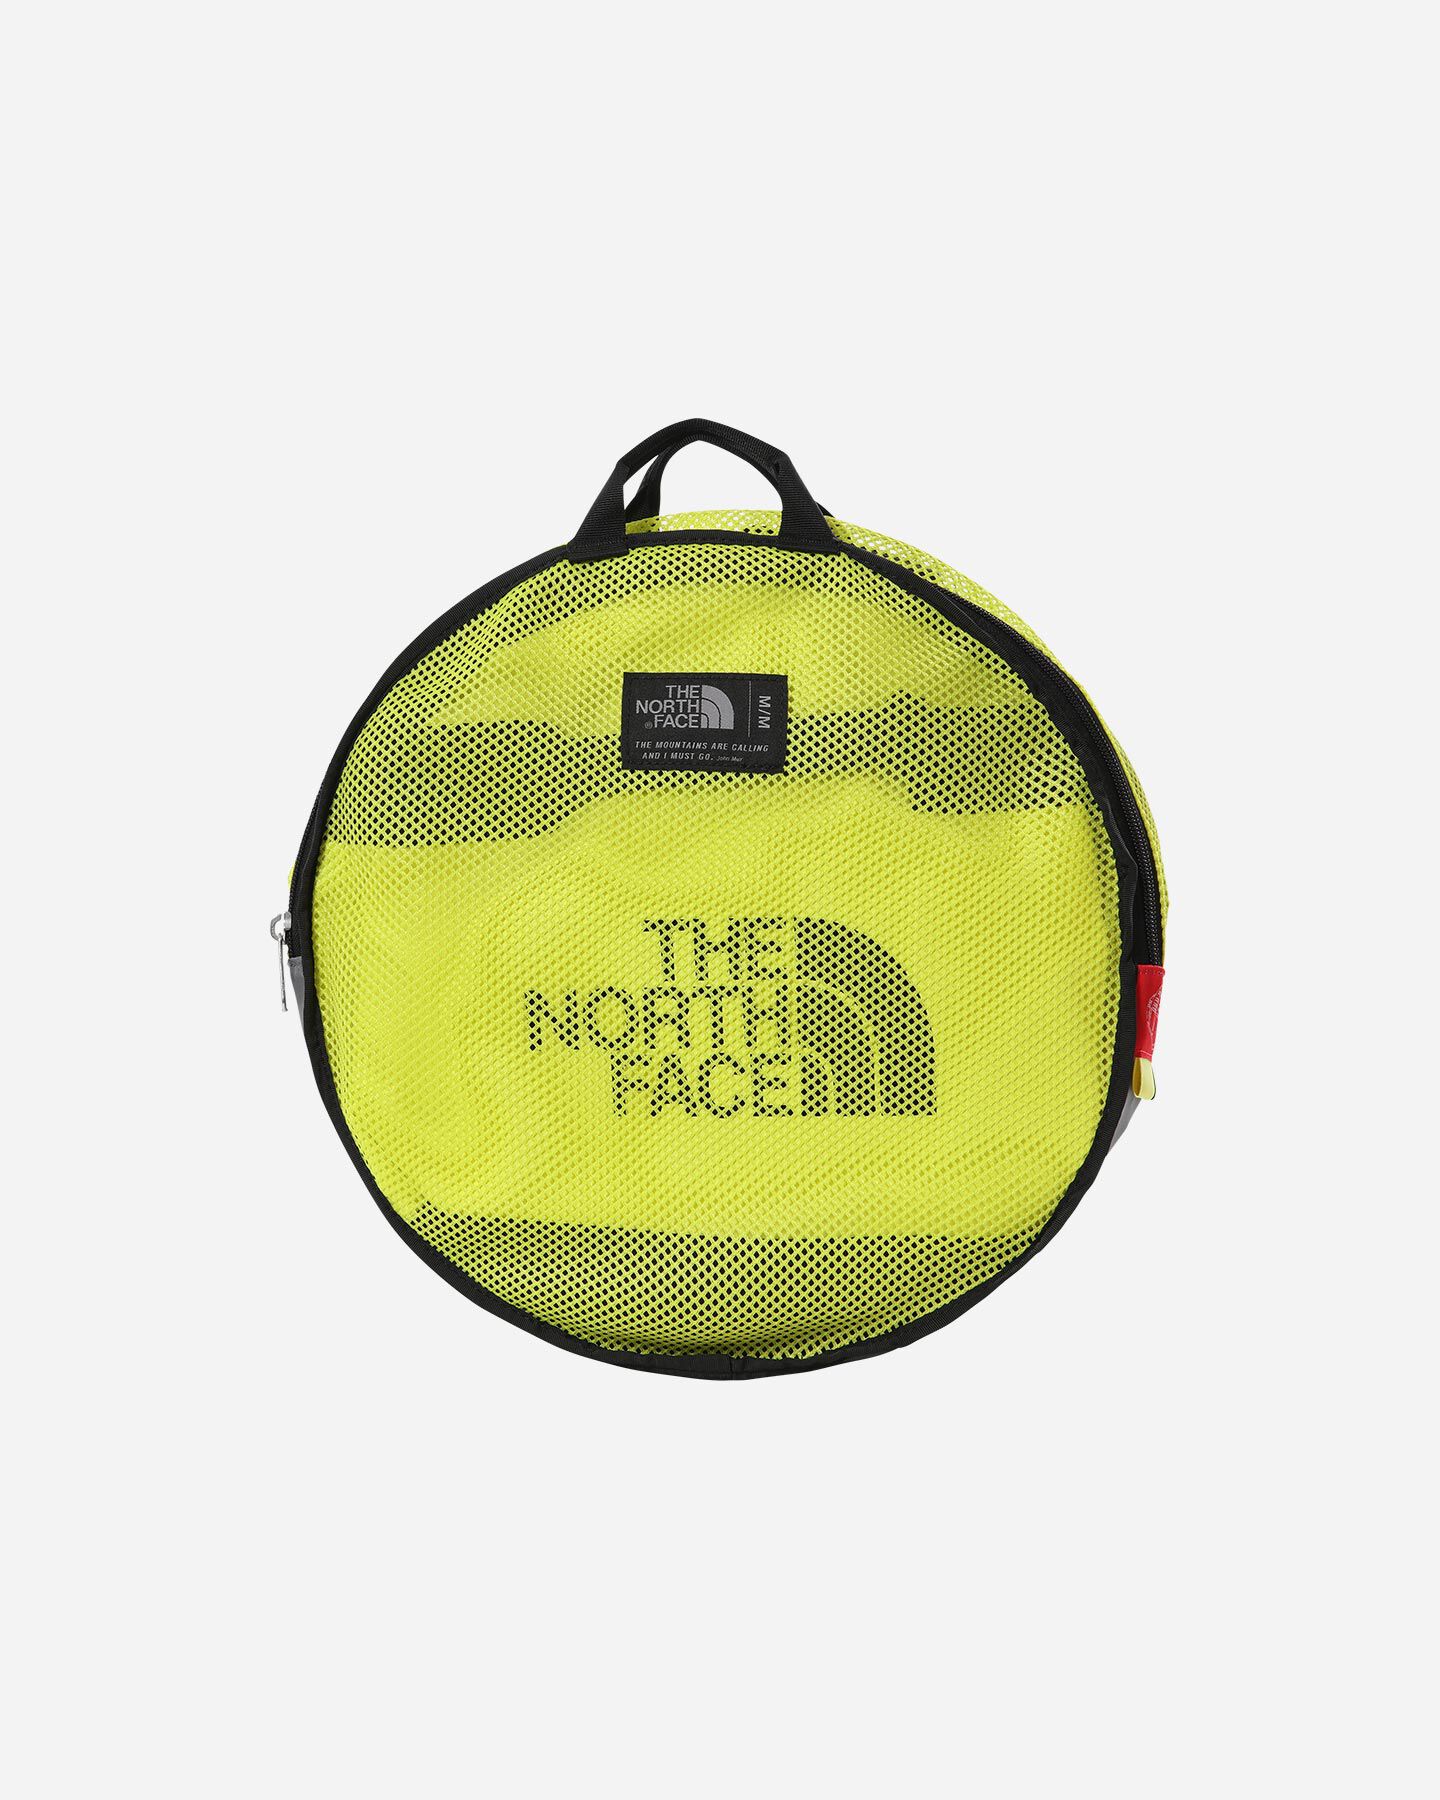  Borsa THE NORTH FACE BASE CAMP DUFFEL M  S5292386|C6T|OS scatto 3